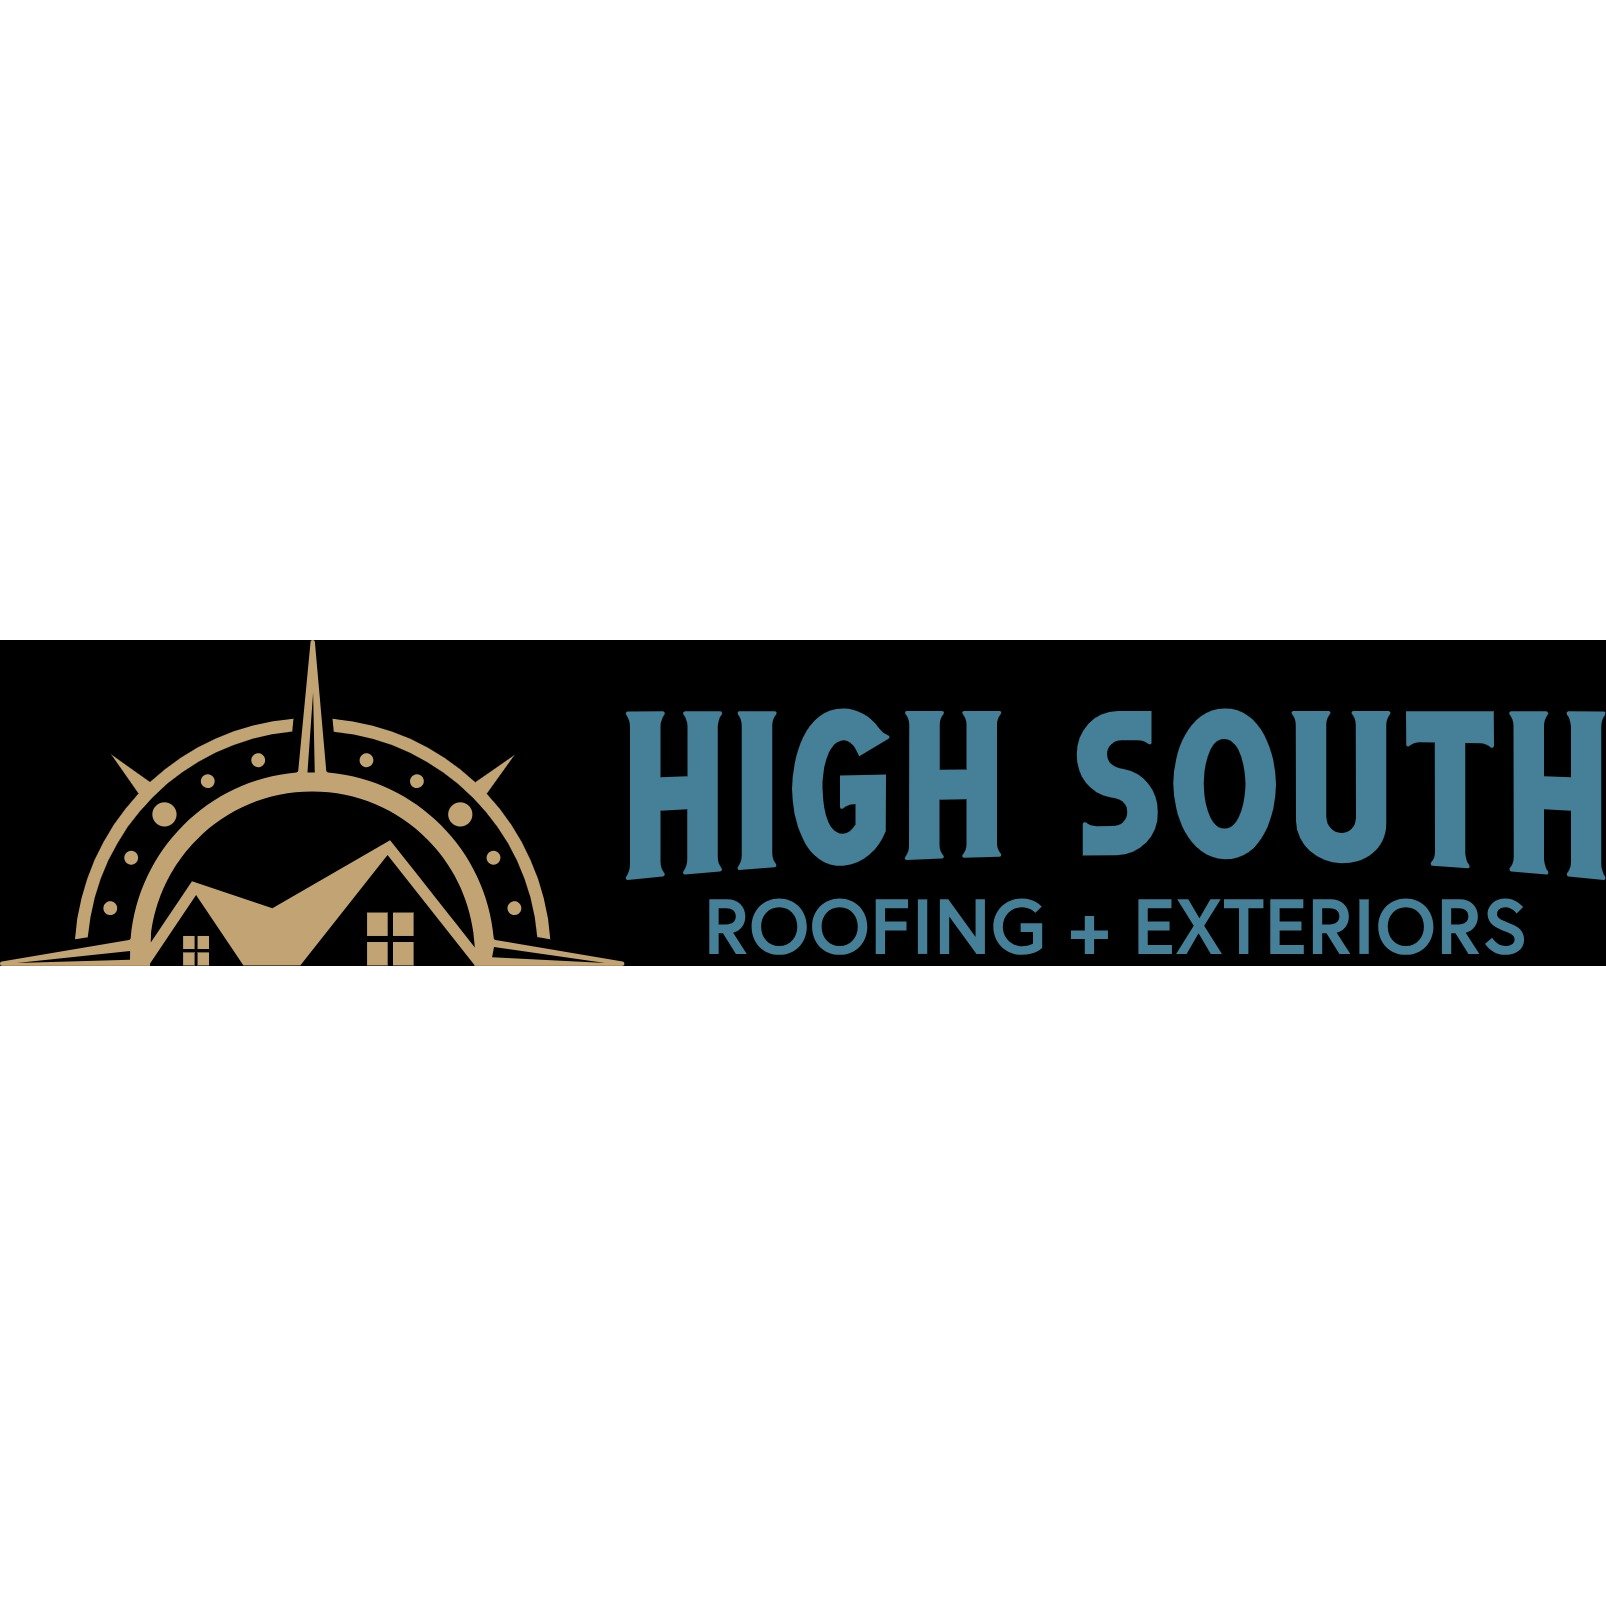 High South Roofing & Exteriors - Murfreesboro, TN - (931)273-3026 | ShowMeLocal.com